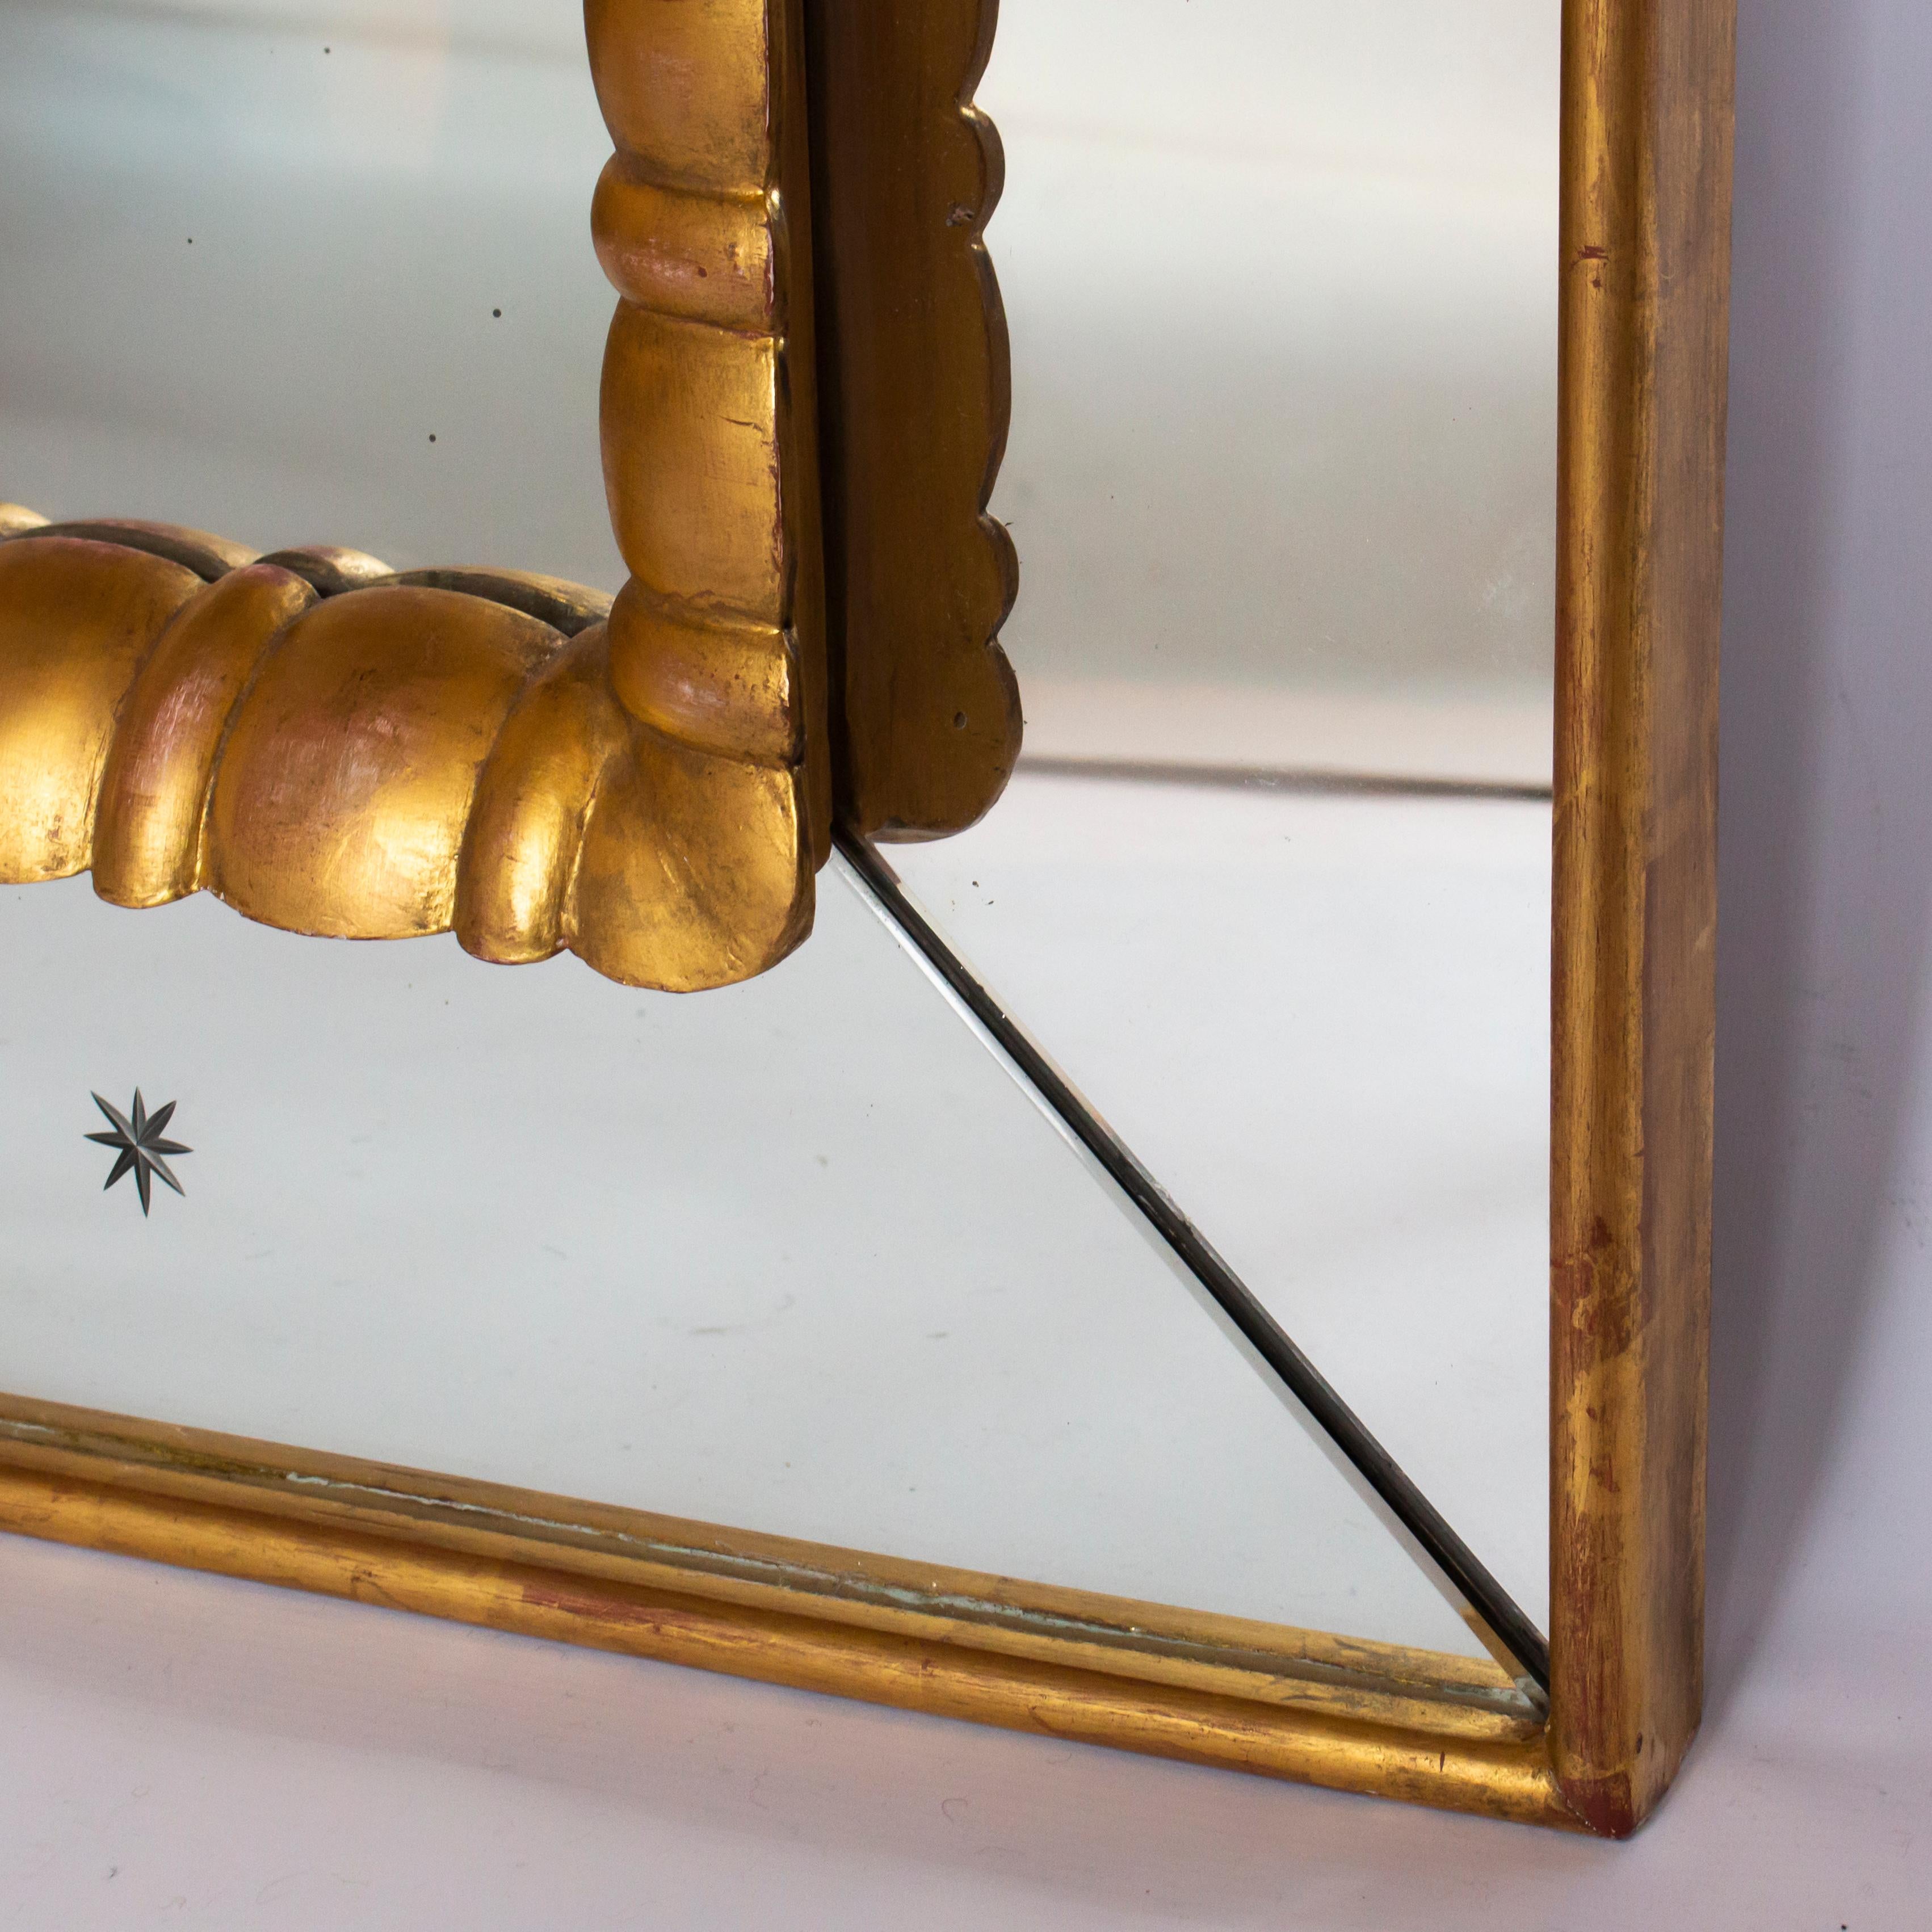 1950s Italian mirror with giltwood frame and inner carved giltwood frame. Can be hung horizontally or vertically,
circa 1950.